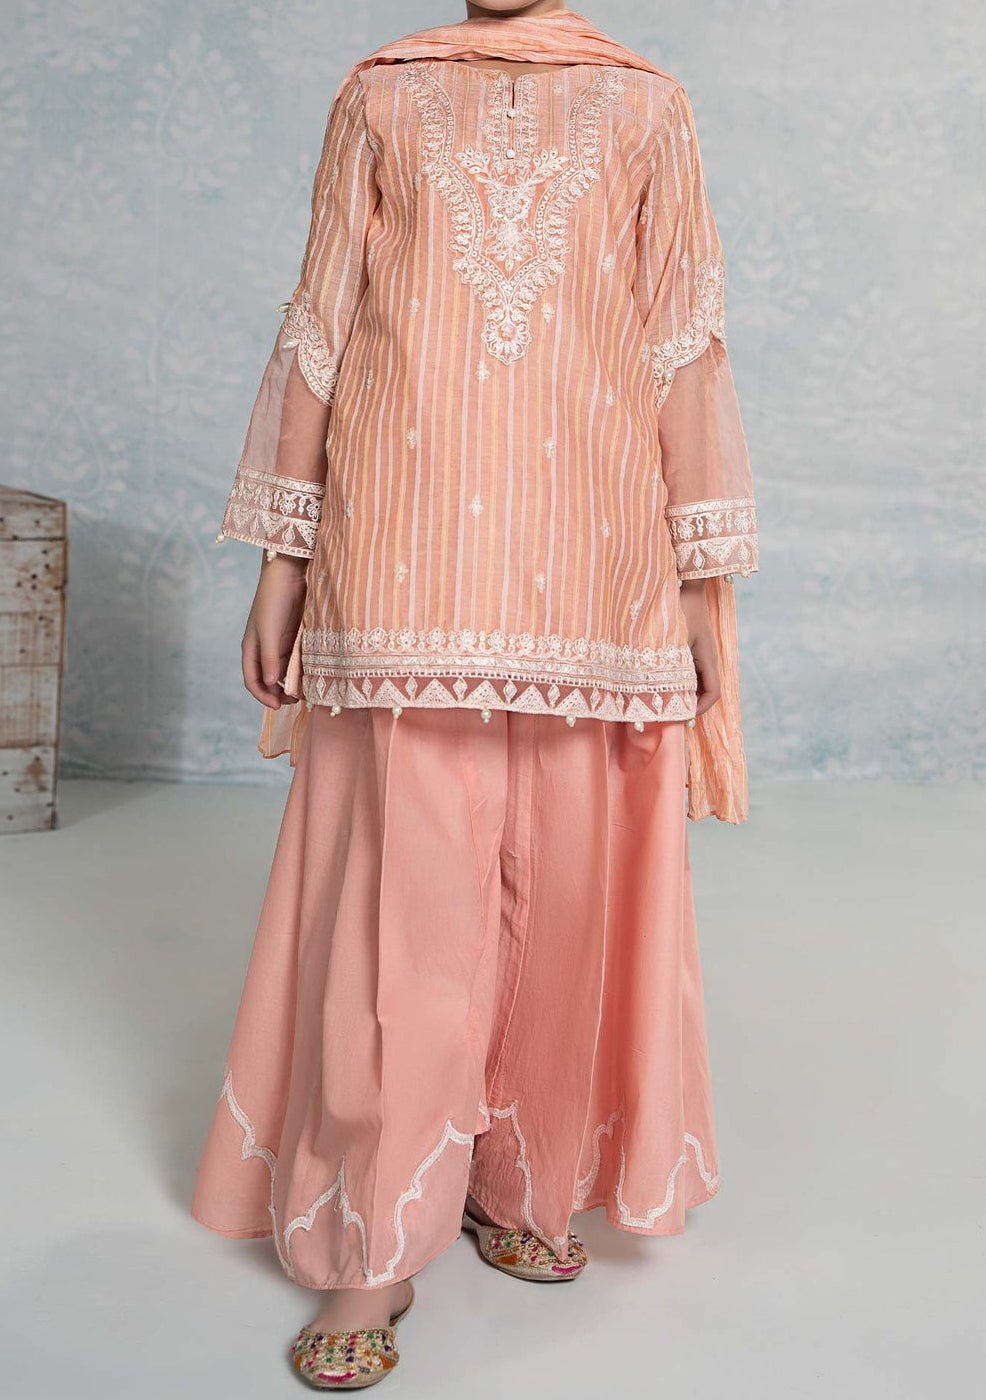 Maria.B Girl's Embroidered Cotton Palazzo Suit - db25397